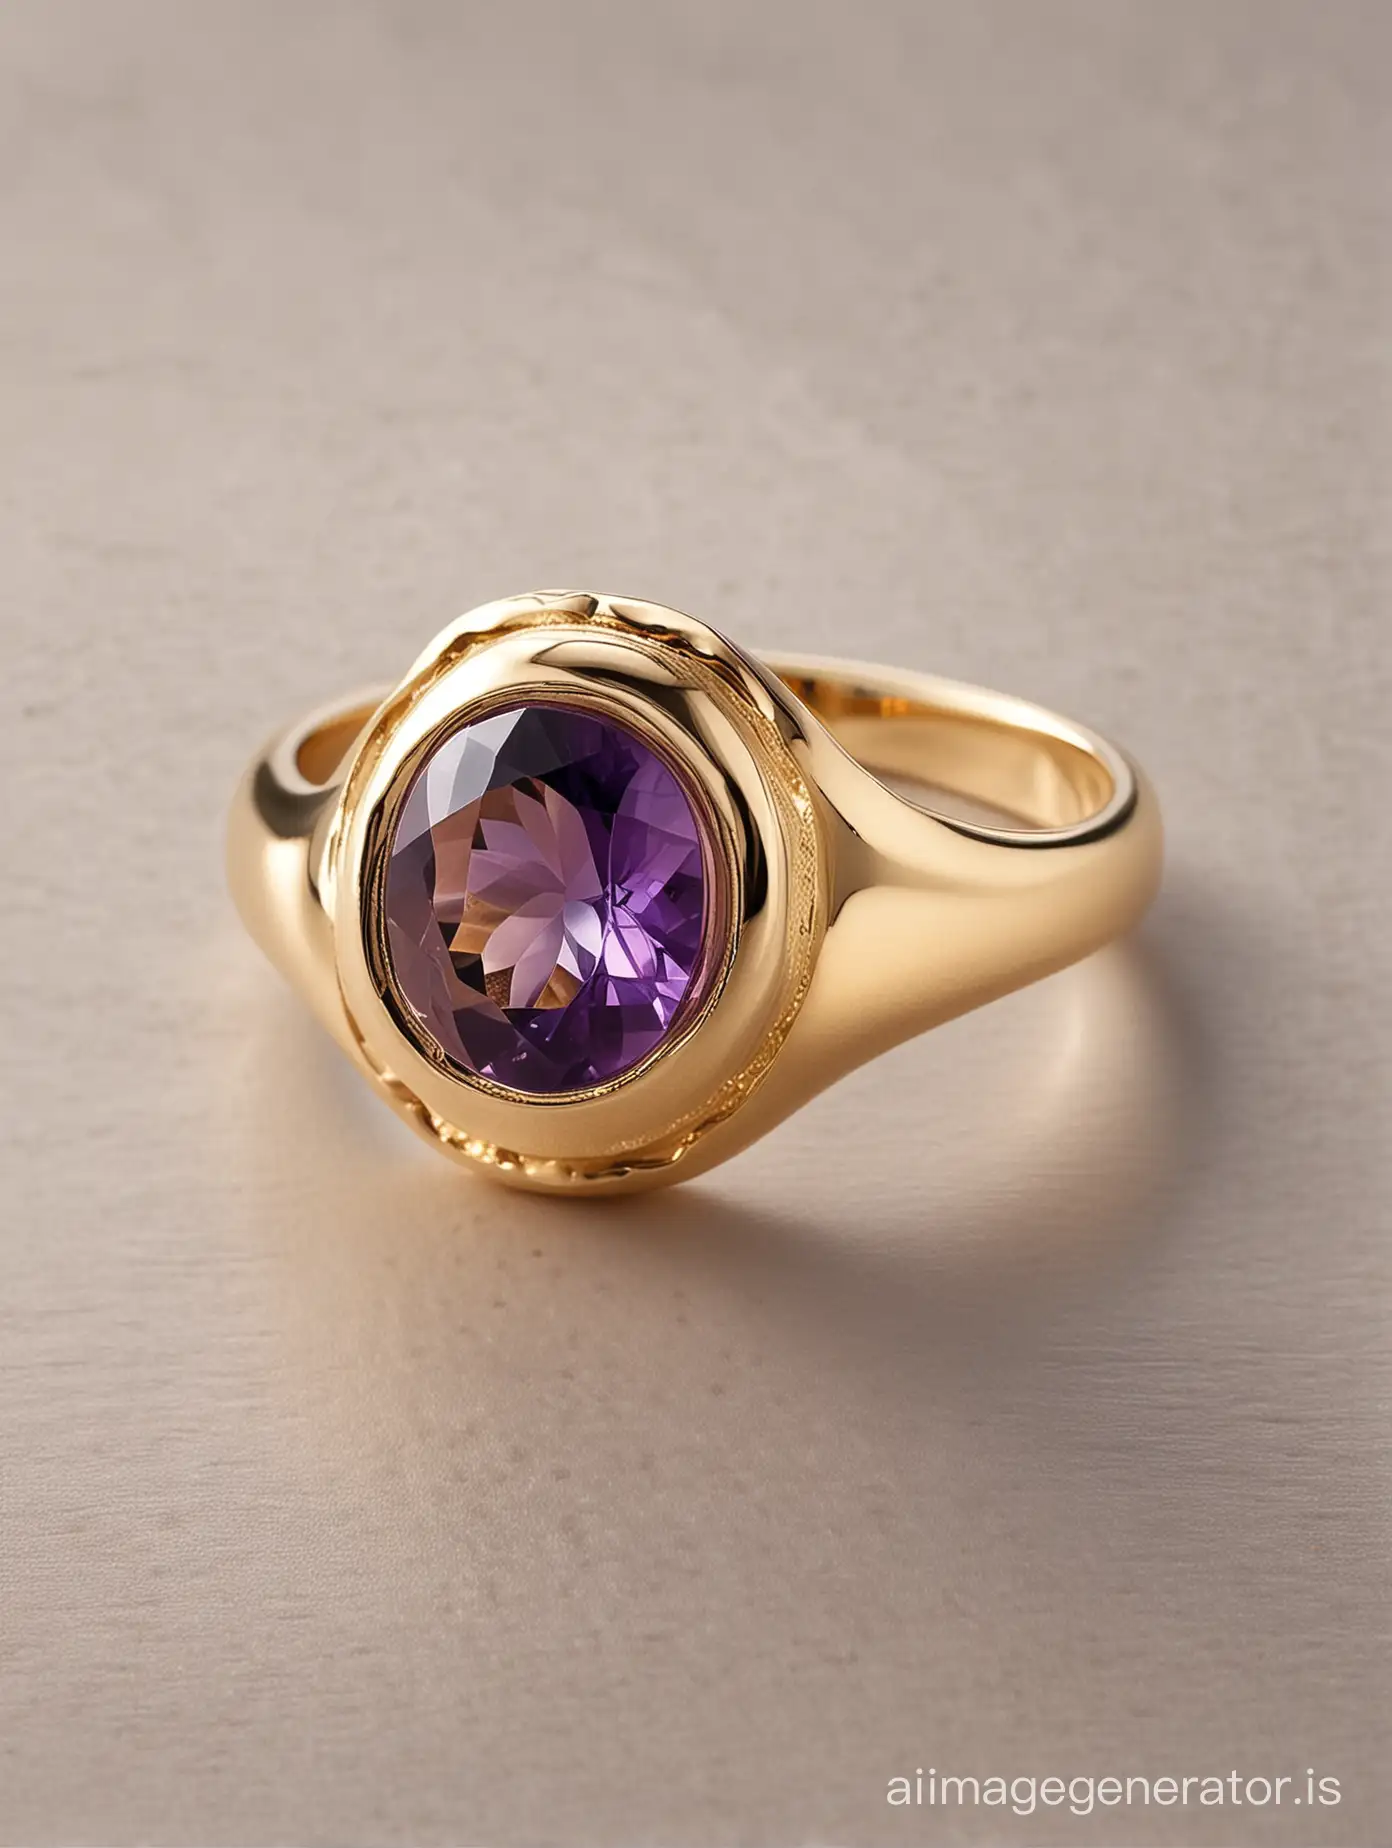 A minimalistic signet ring adorned with an amethyst gemstone in the center. The stone, known for its deep purple hue and calming effect, is perfectly faceted and appears to radiate a warm, iridescent glow. The ring's shank is elegantly simple, tapering slightly as it encircles the finger, showcasing the gemstone to perfection. A striking classic signet ring adorned with an amethyst gemstone in the center. The stone, known for its deep purple hue and calming effect, is perfectly faceted and appears to radiate a warm, iridescent glow. The gemstone is set directly into the metal.
The ring's shank is elegantly simple, tapering slightly as it encircles the finger, showcasing the gemstone to perfection.
The background is a pastel beige shade, reminiscent of golden hour sky sunset. 